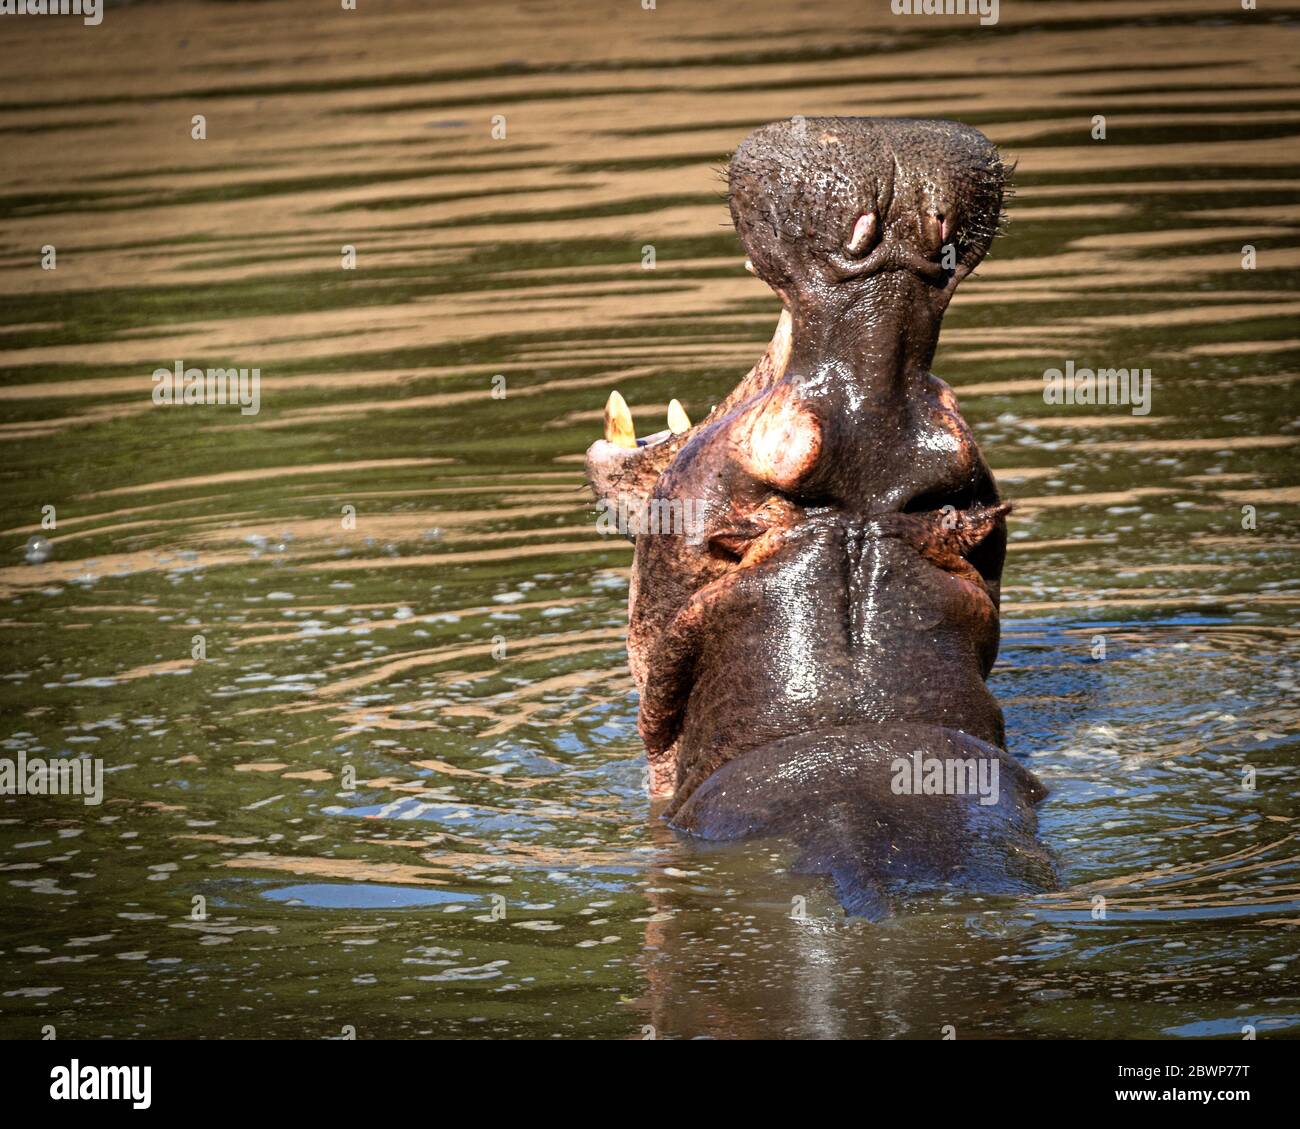 Hungry hippo with mouth wide open in waters of Kenya Africa Stock Photo